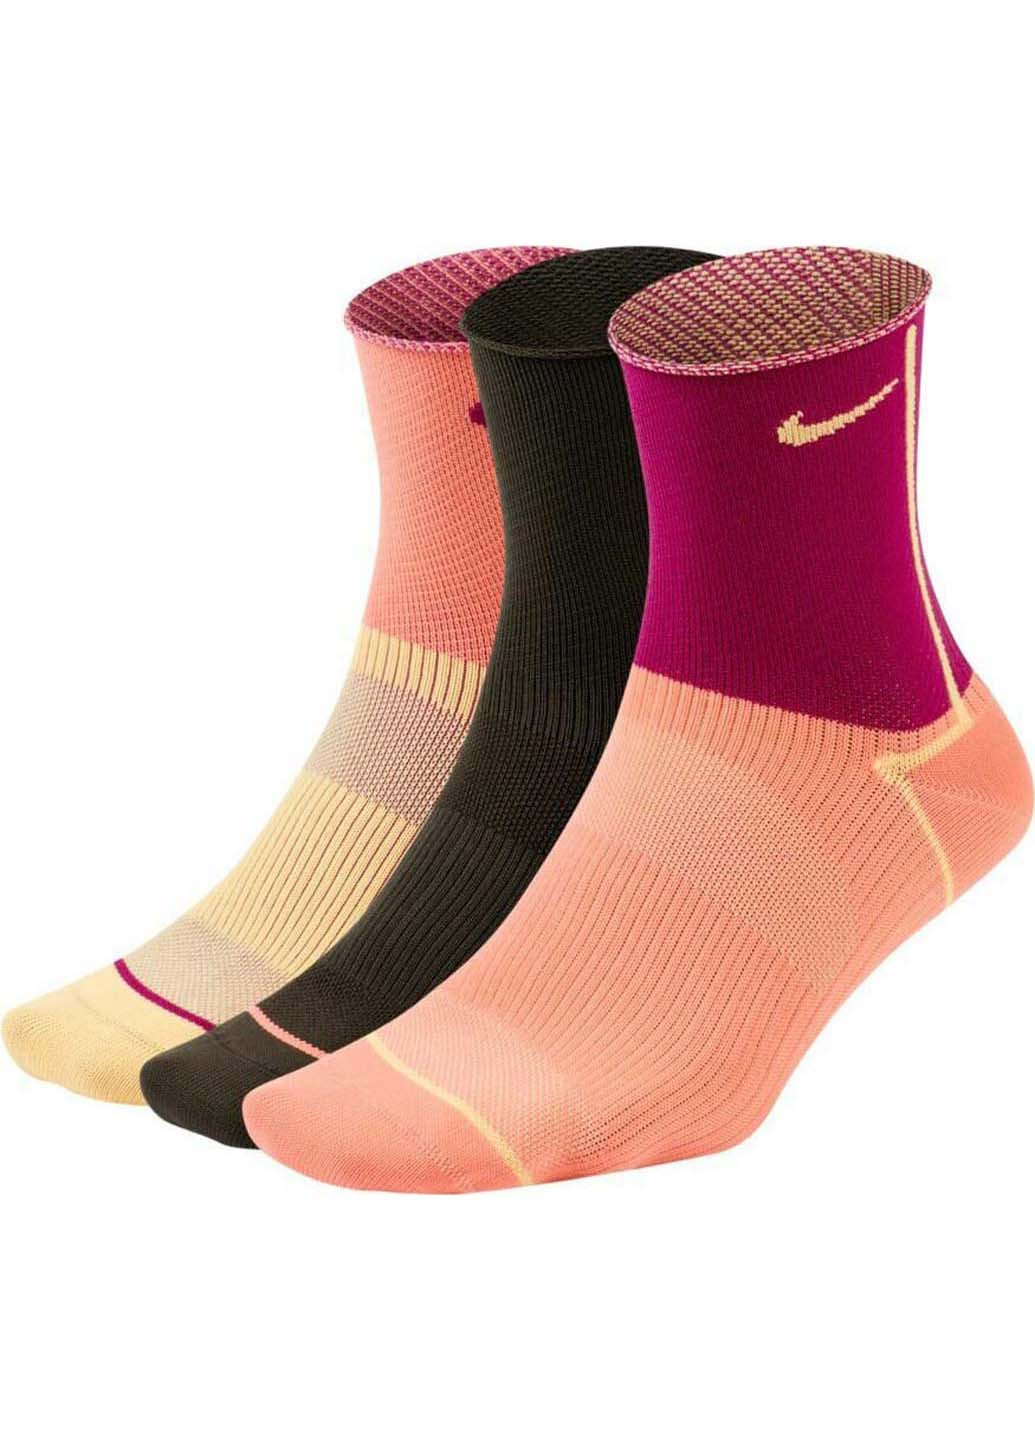 Носки Nike everyday plus lightweight ankle 3-pack (256931512)